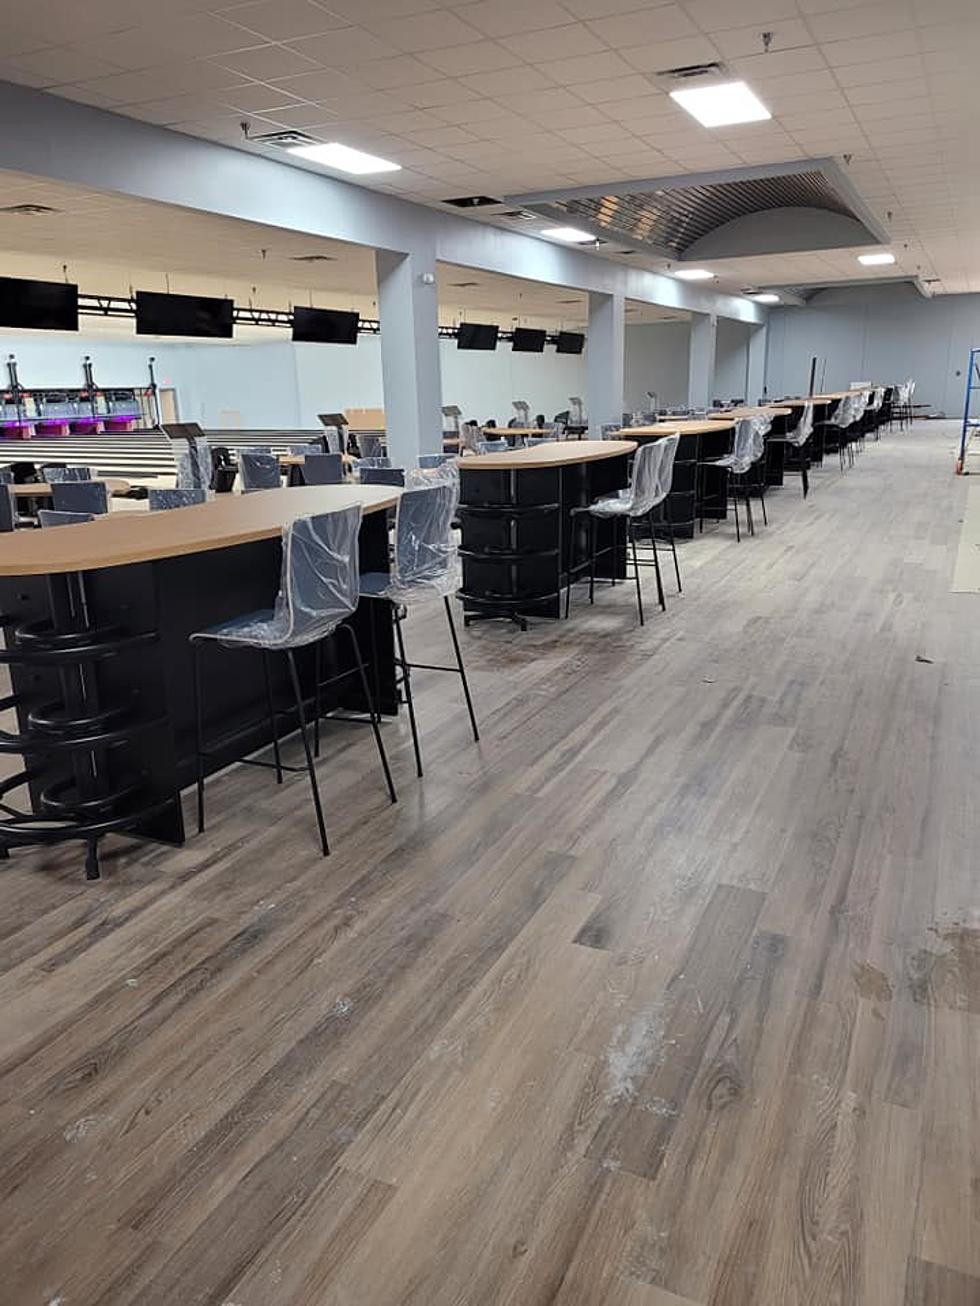 Petro Bowl In Lake Charles Shares Pictures Of Their Rebuild